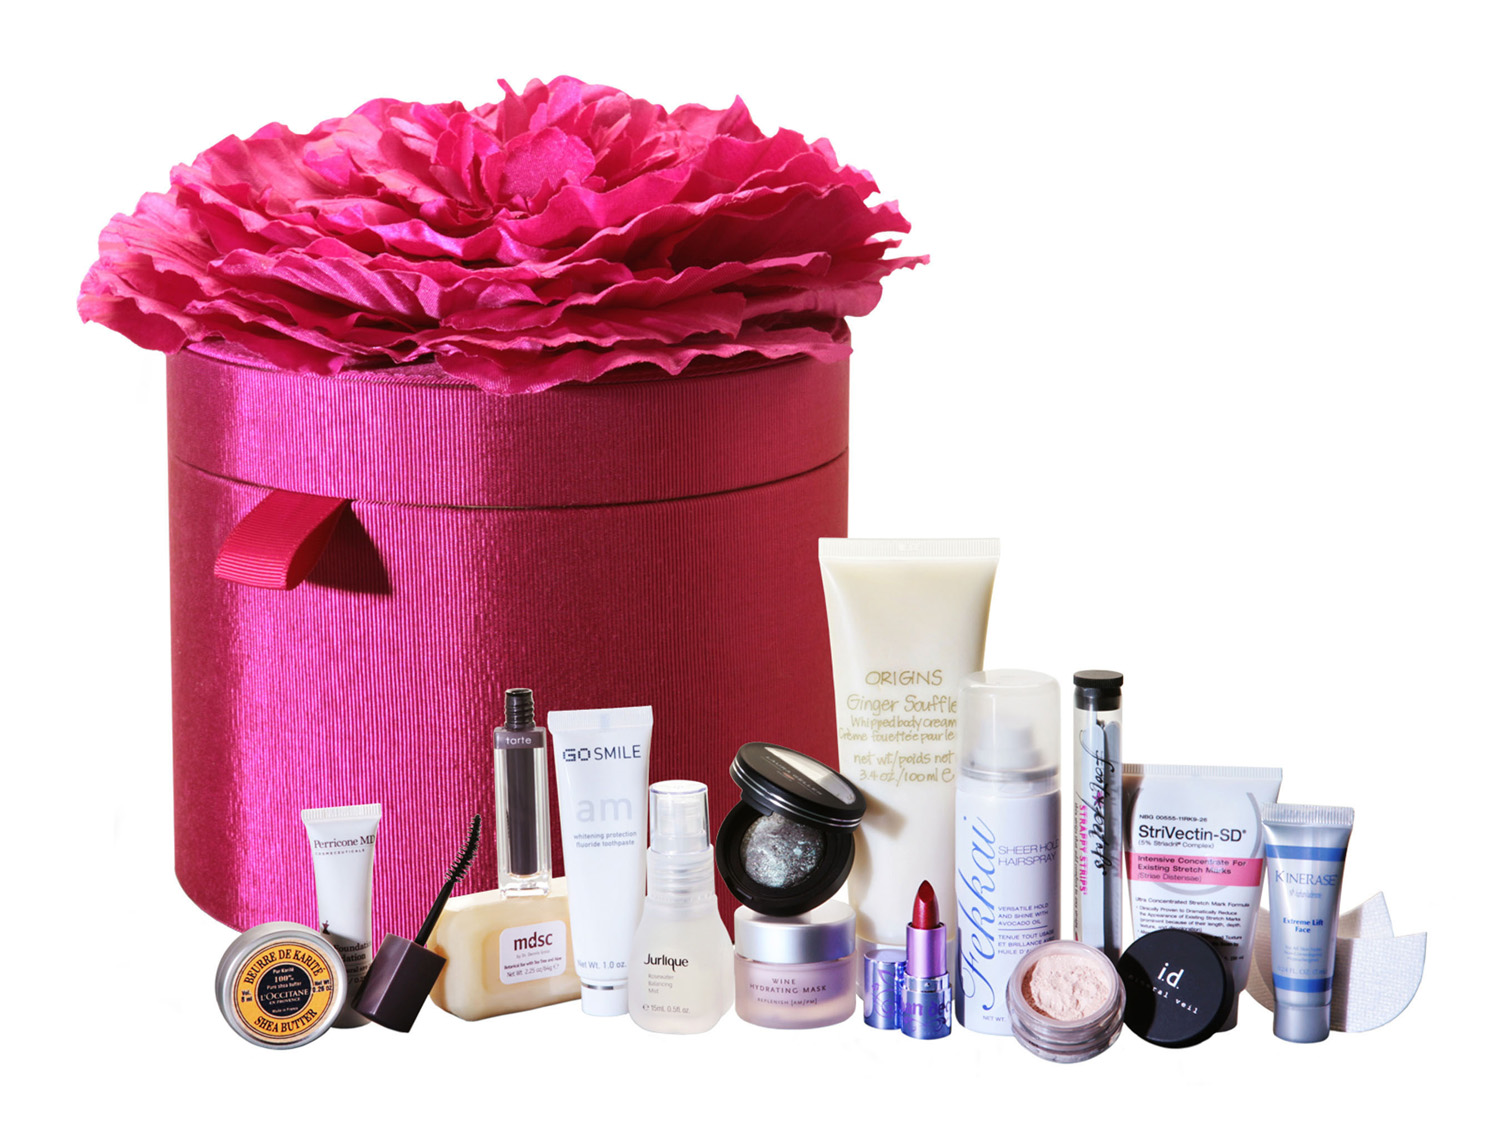 Marchesa Designs Red Carpet Ready Kit for Beauty.com